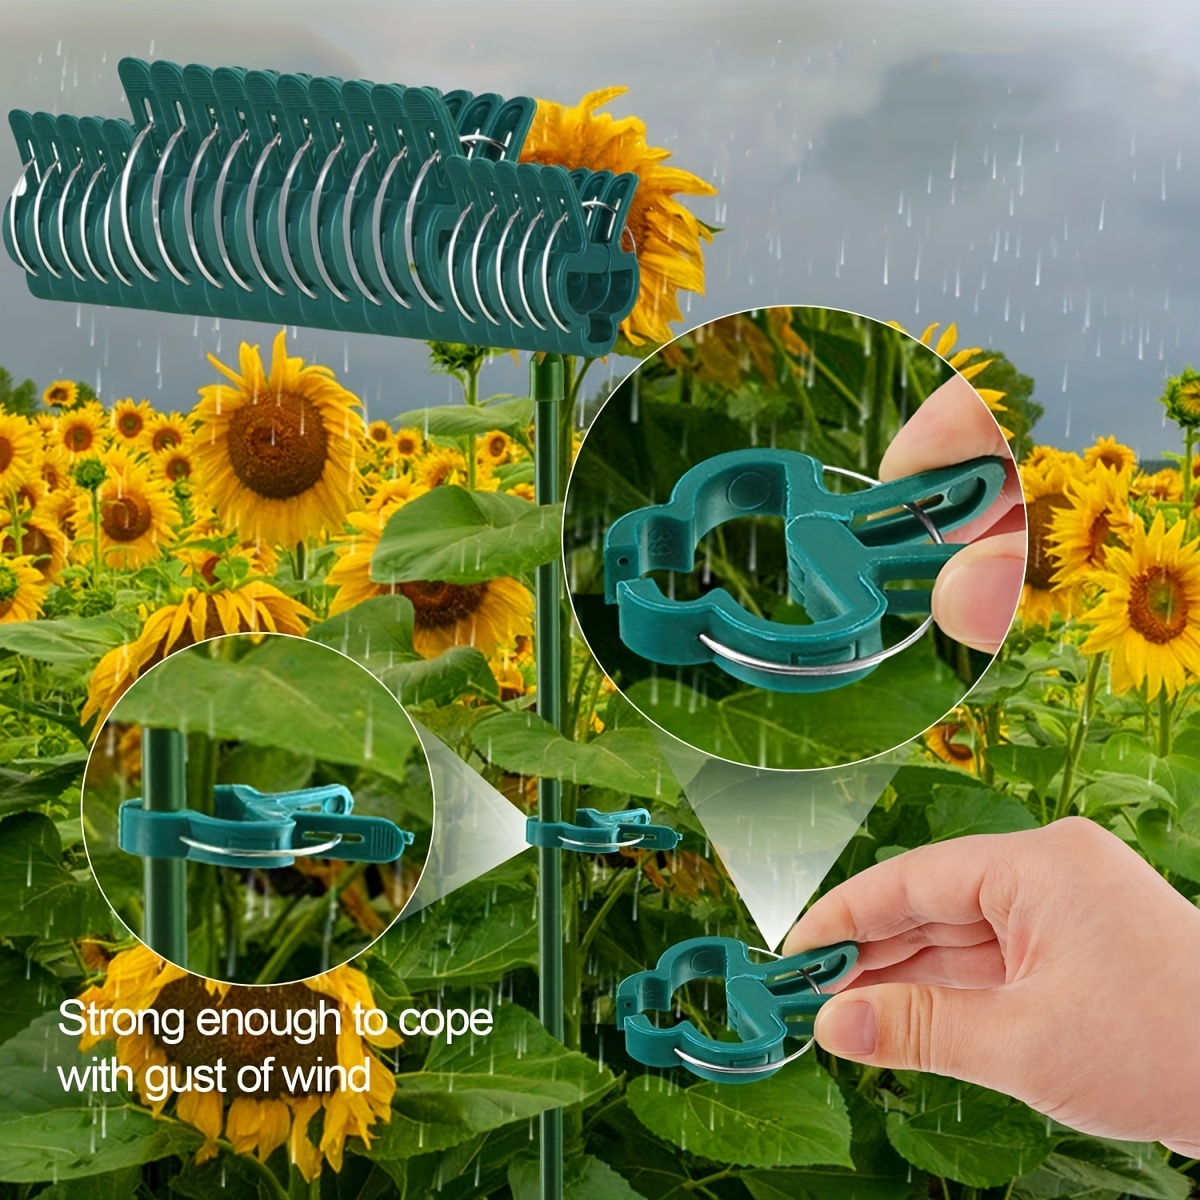 

20-piece Garden Support Clips For Flowers & Vines - Upright Growth Aid, Tomato Cage Compatible, 2 Sizes Included, Durable Plastic In Teal